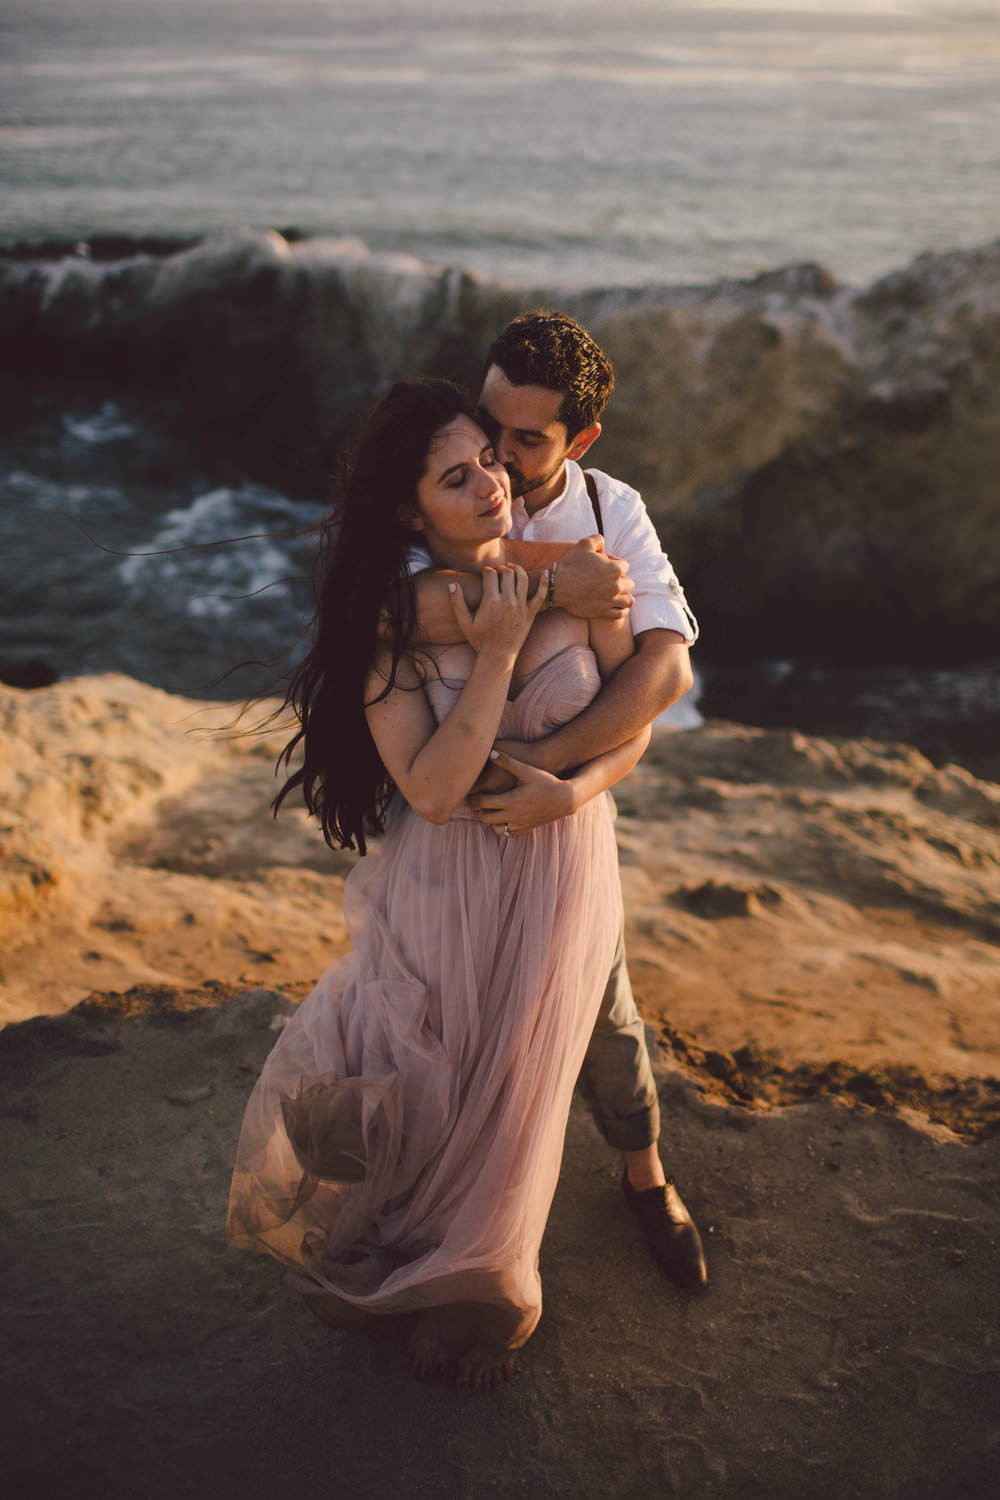  outdoor elopement, where to elope in california, how to elope in los angeles, beach elopement, beach elopement locations, elopement ideas, elopement dress, sunrise elopement, california elopement packages,california elopement ideas, elopement inspiration, adventure elopement ideas, sunset elopement, sunset wedding, small wedding, places to elope in california, destination elopement, malibu elopement, adventure elopement, elopement bouquet, nature elopement, bohemian elopement 